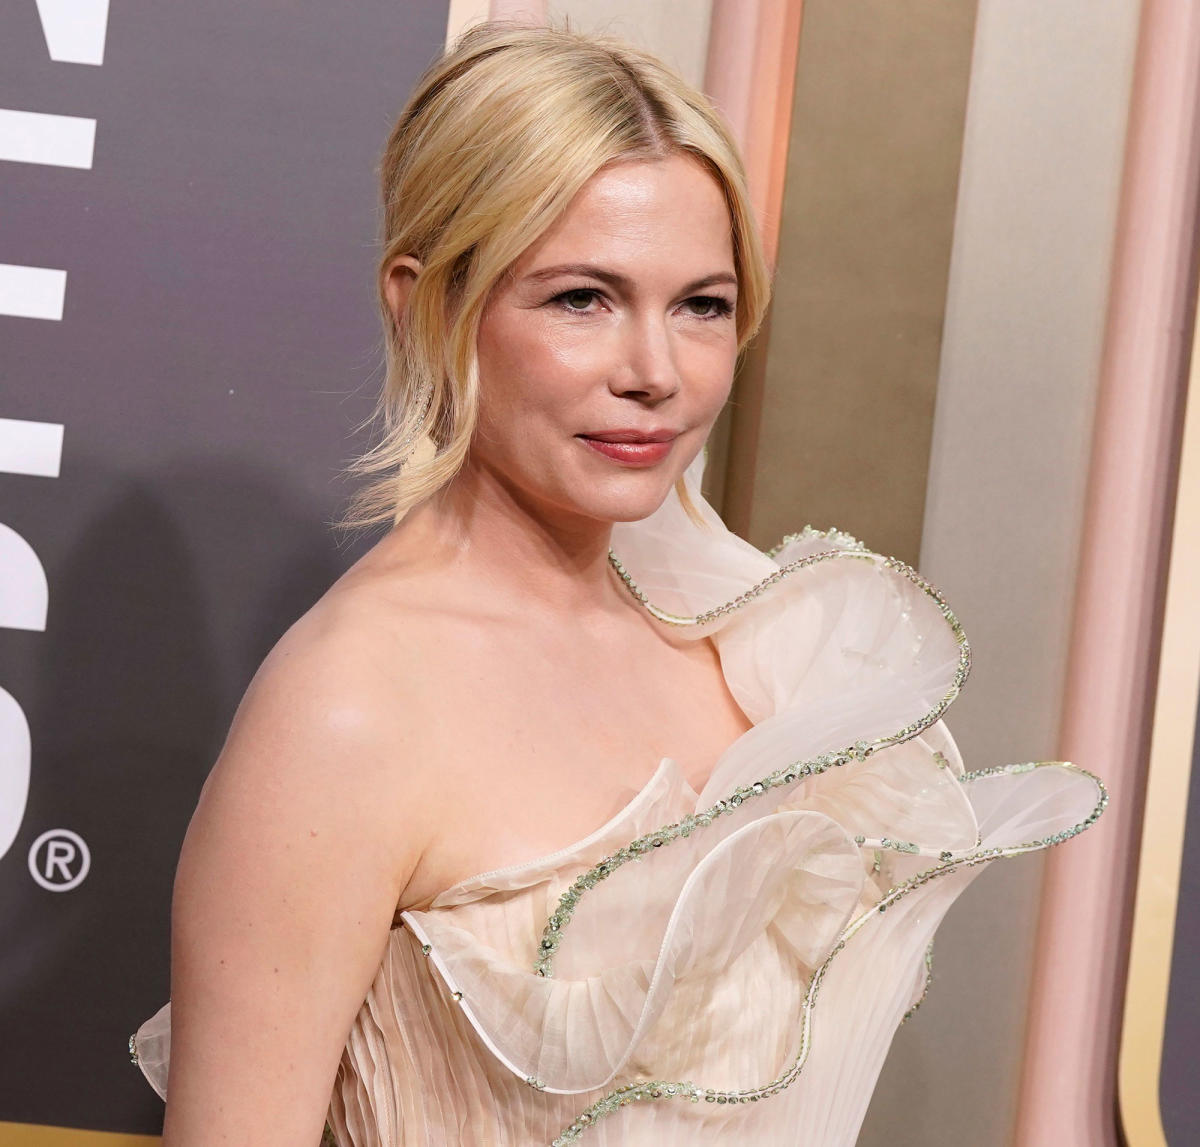 Michelle Williams Rocks Daring White Dress at the 2023 Golden Globes